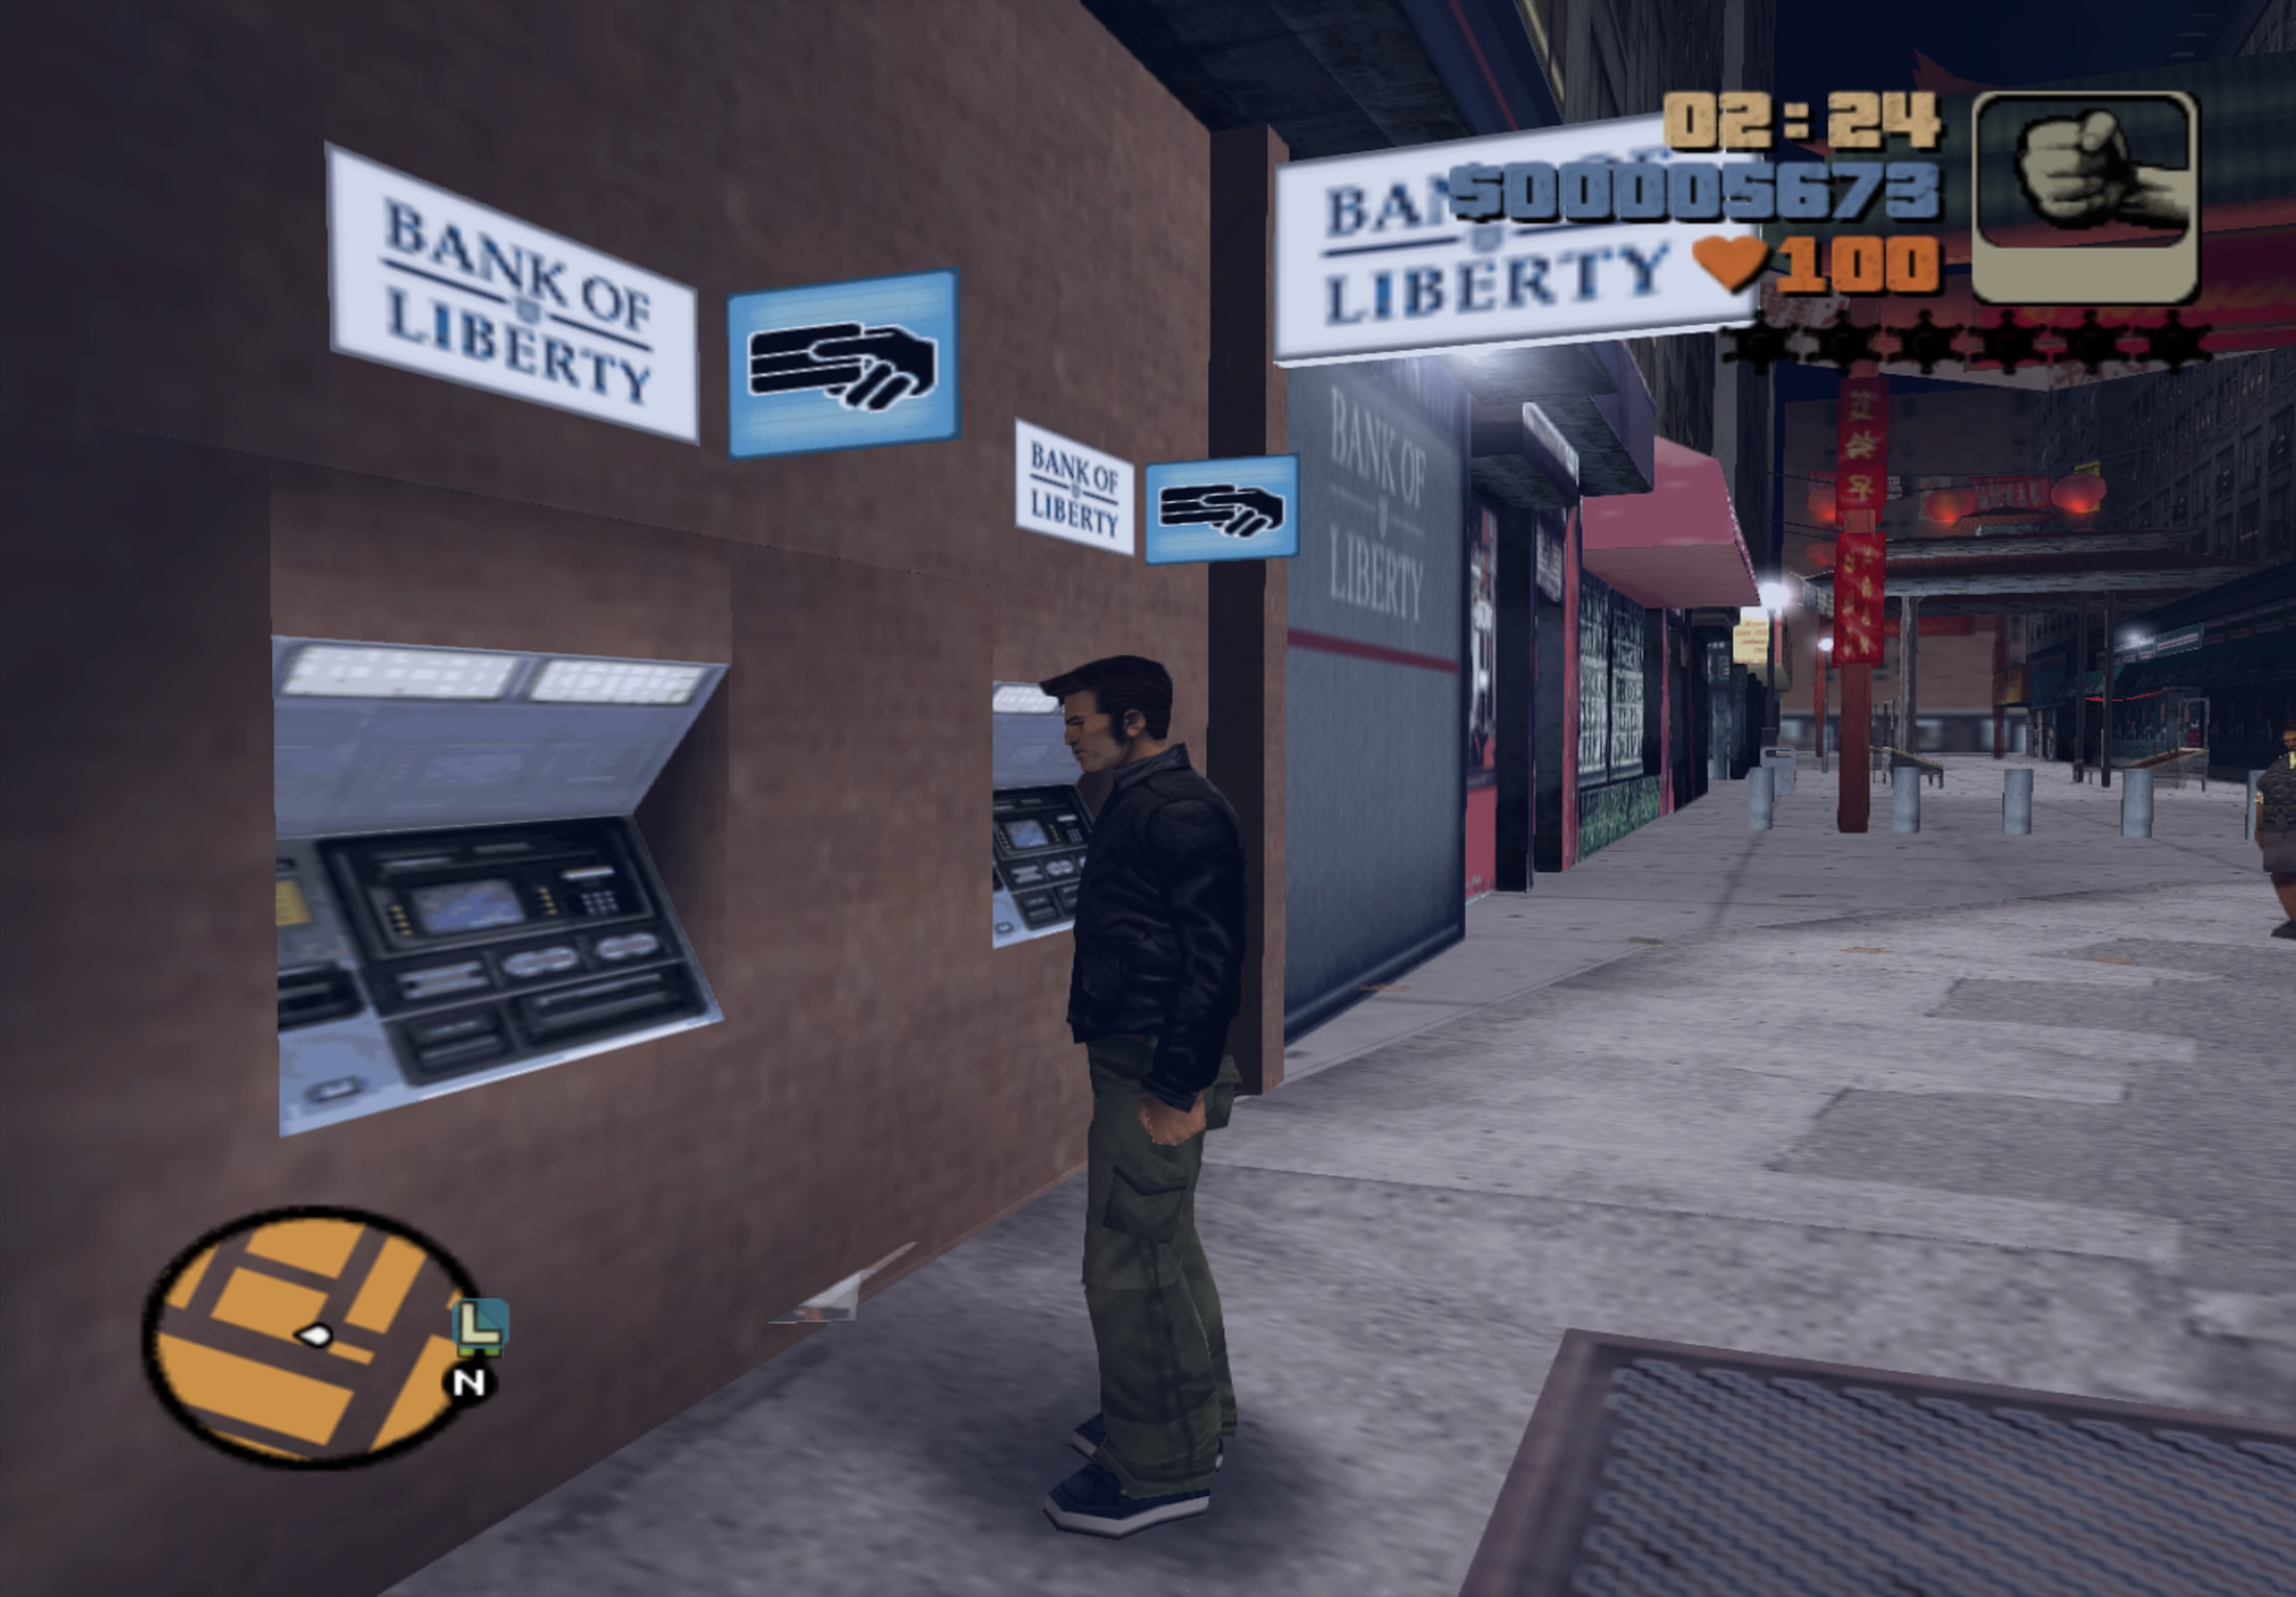 iPhone-toting GTA Plus subscribers can now play two classic Grand Theft Auto  games on the go